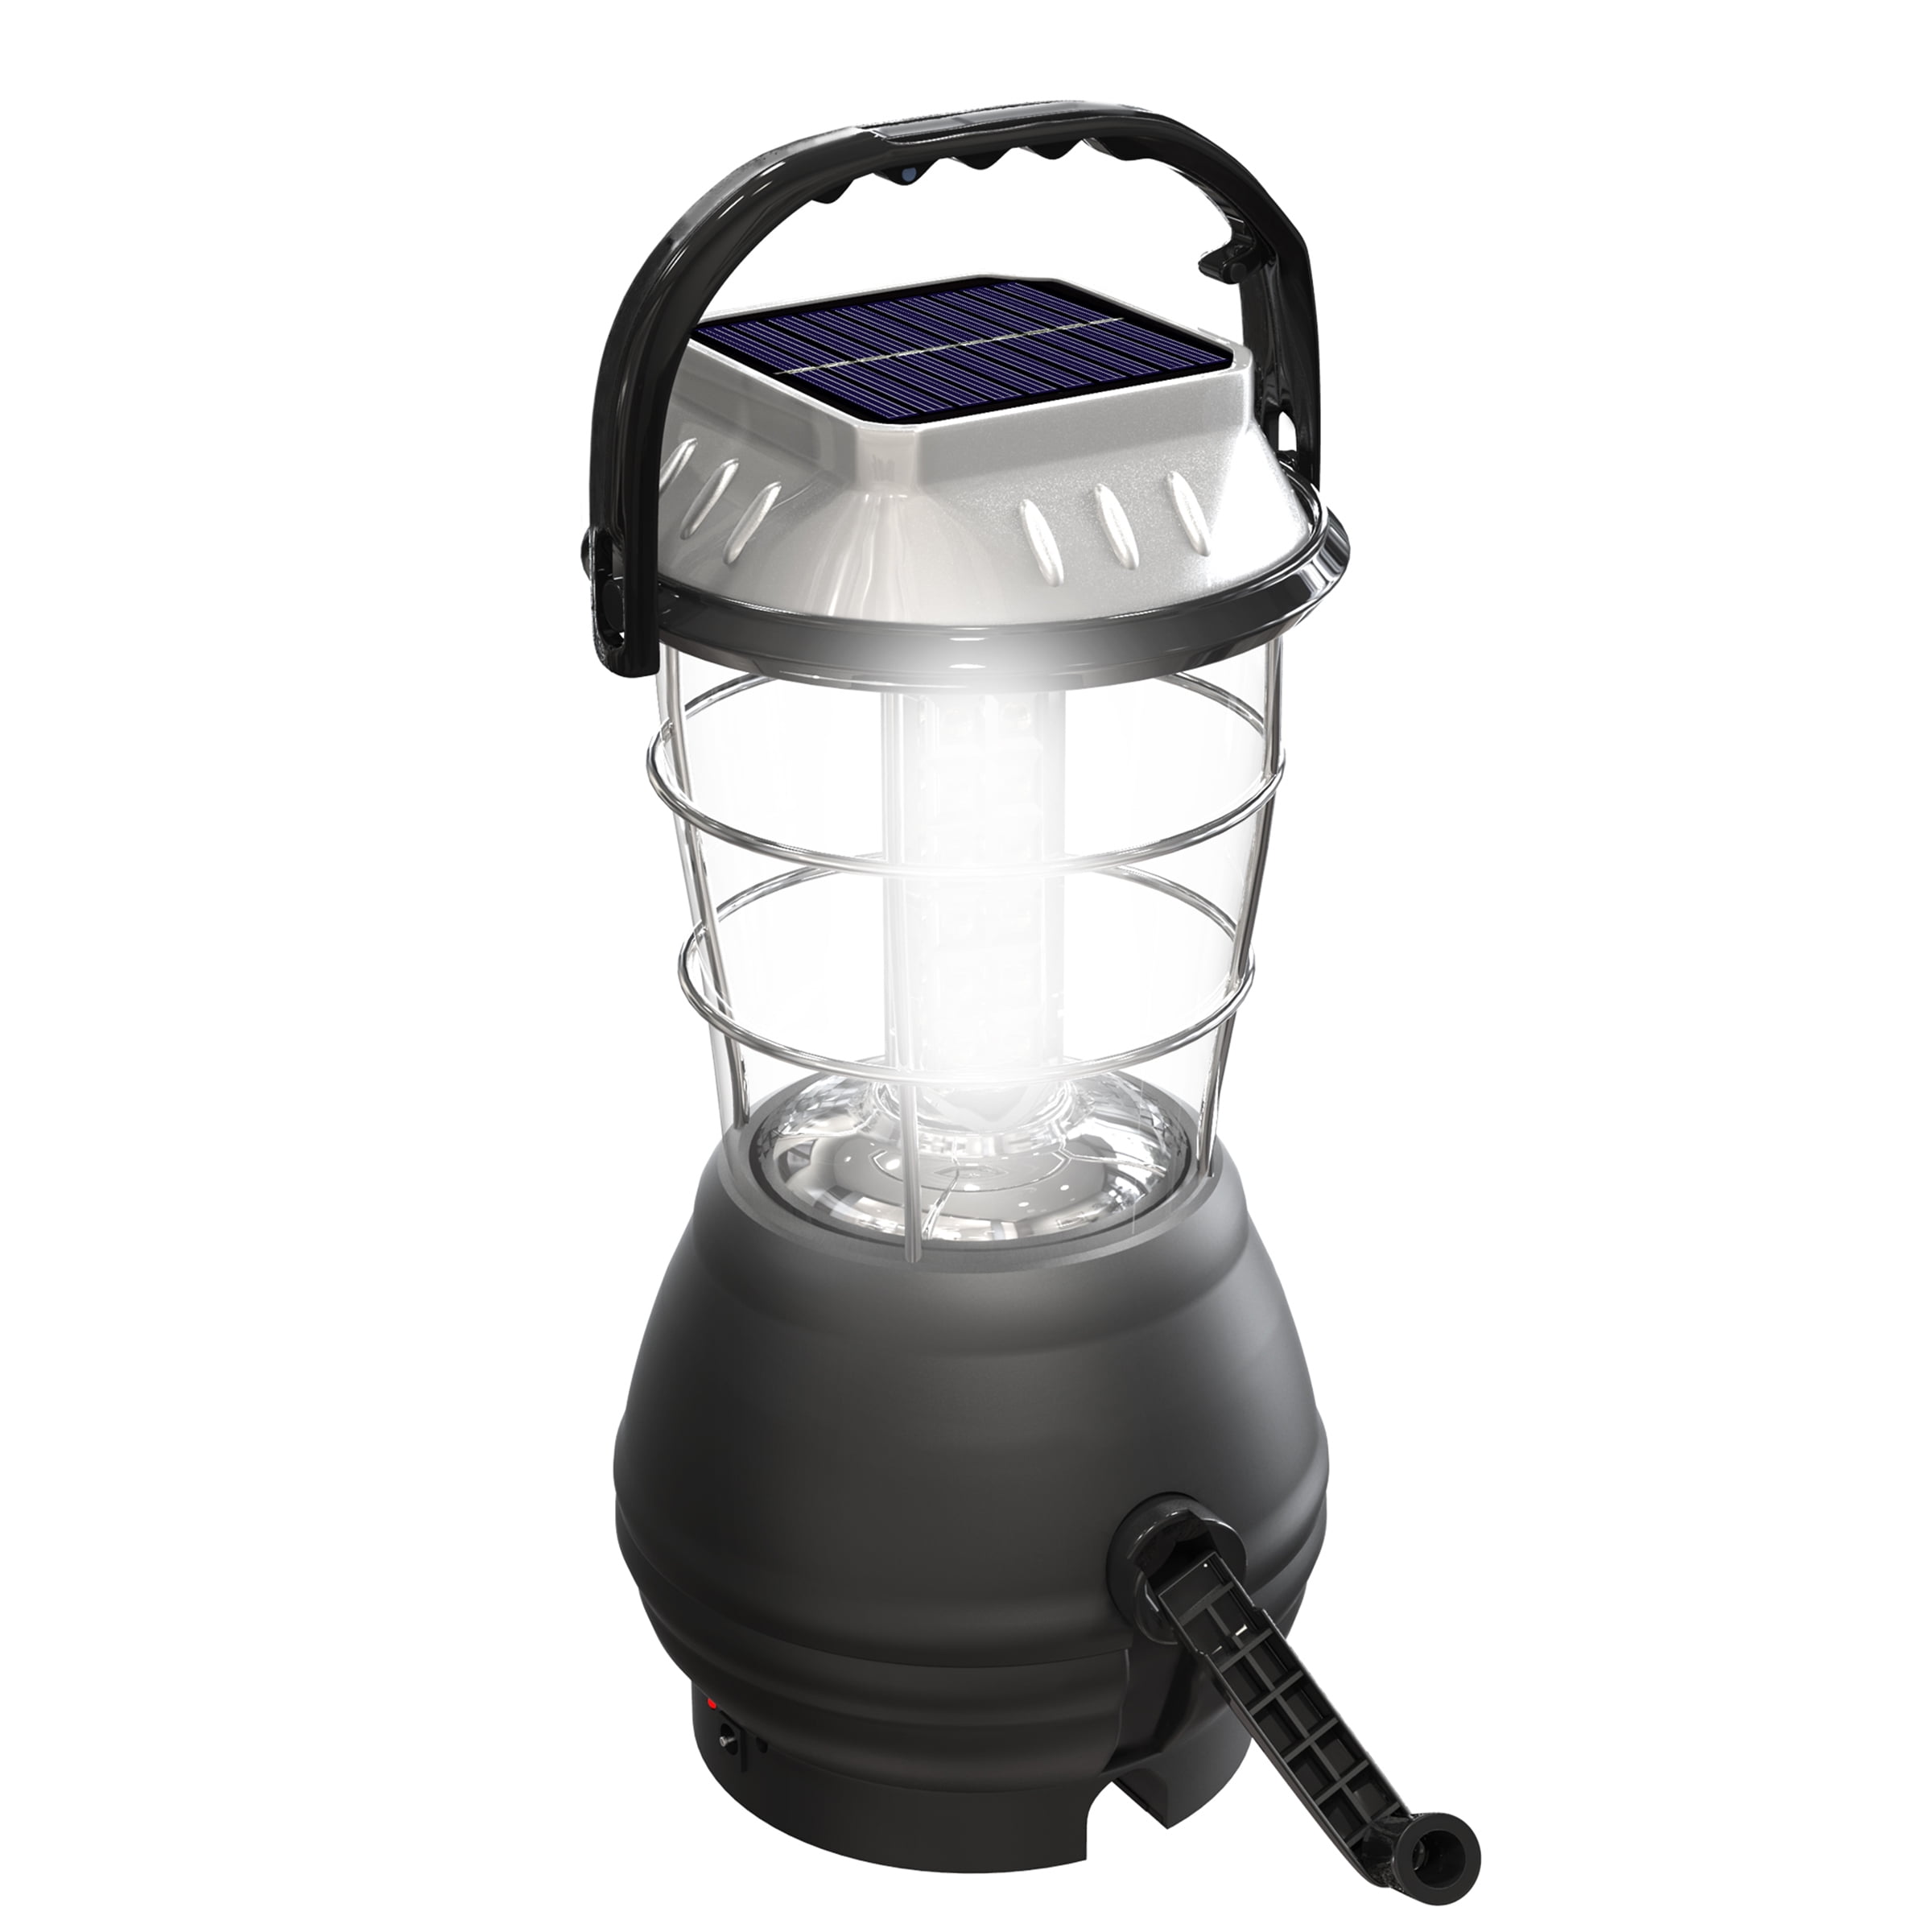 Details about   36 LED Solar Lantern Camping Light Outdoor Hand Crank Dynamo 5 Charging Methods 